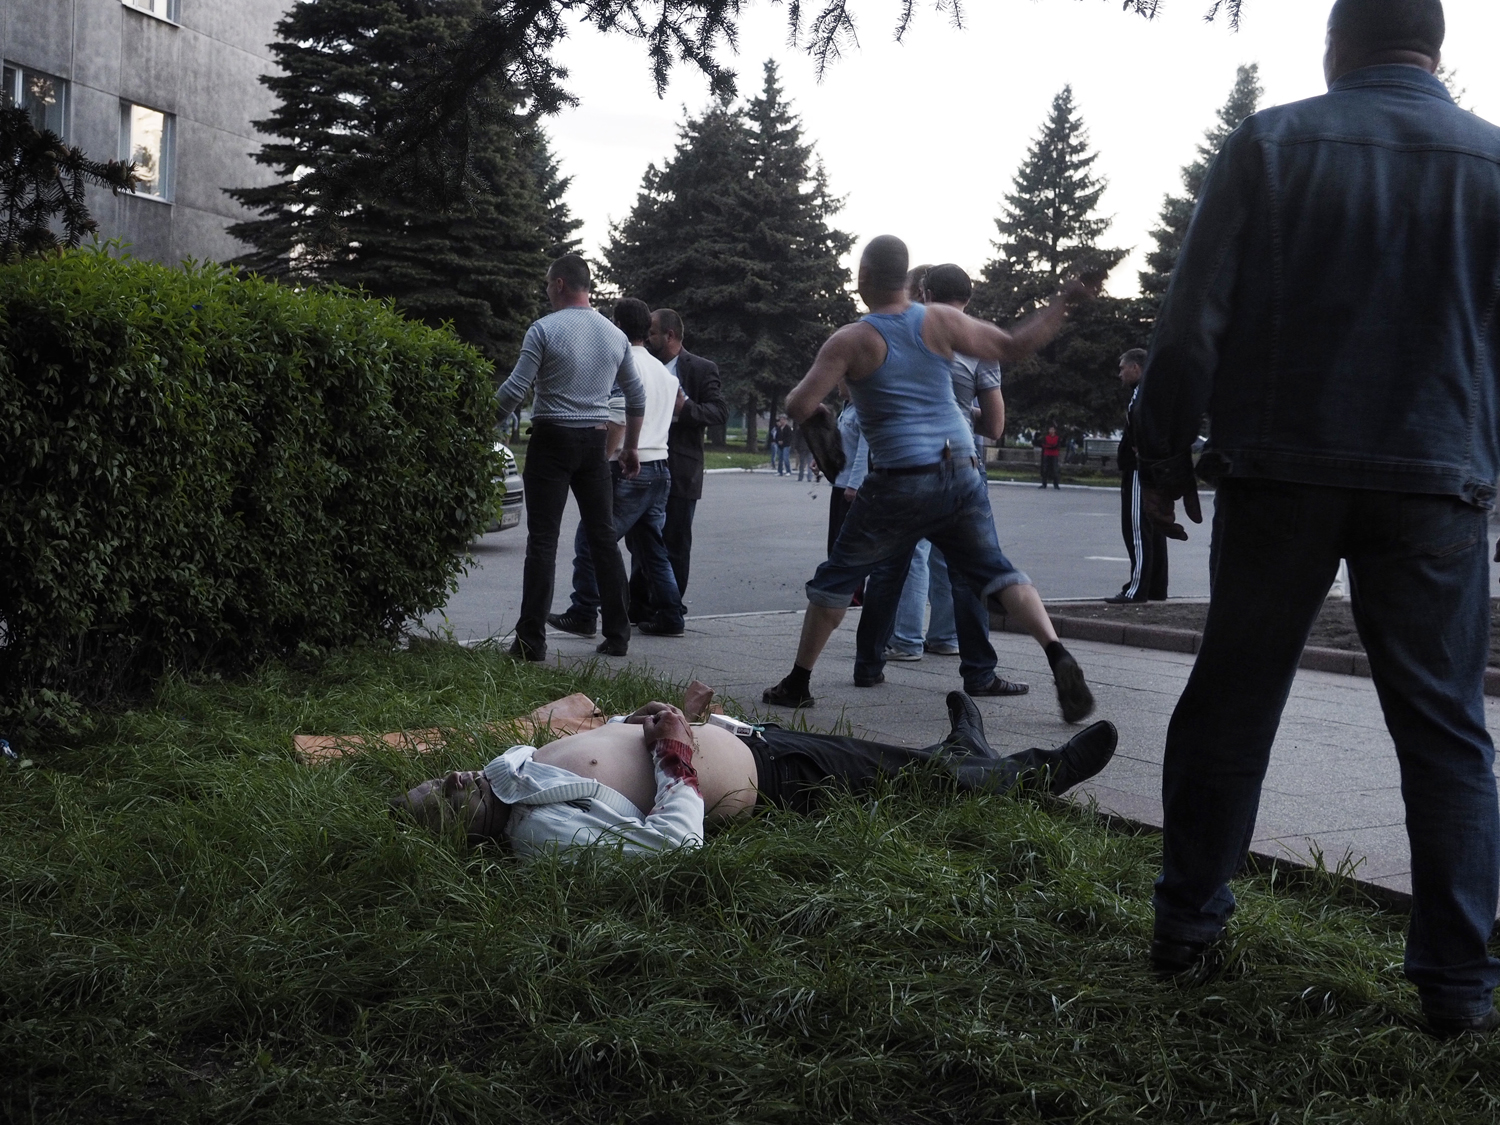 May 11, 2014. A man in blue throws an unknown object in the direction of the armed guards as the other man lies dead. Moments earlier, he had crossed the dead man's arms over his chest.